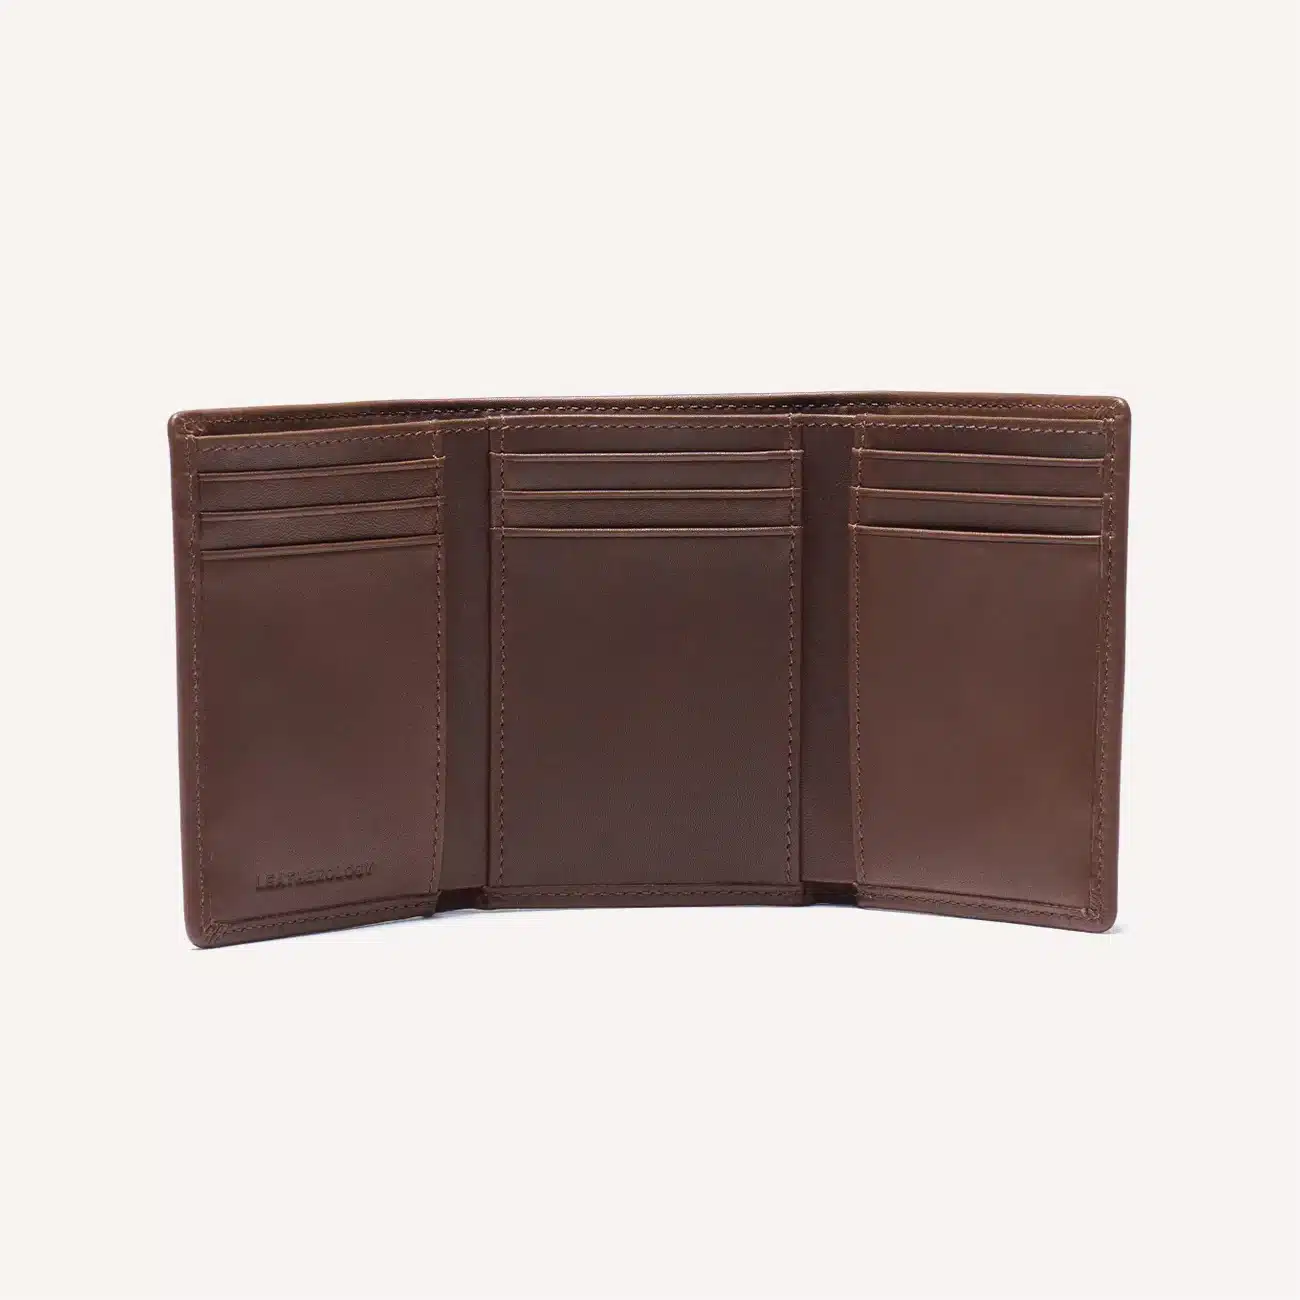 Leatherology Trifold Wallet